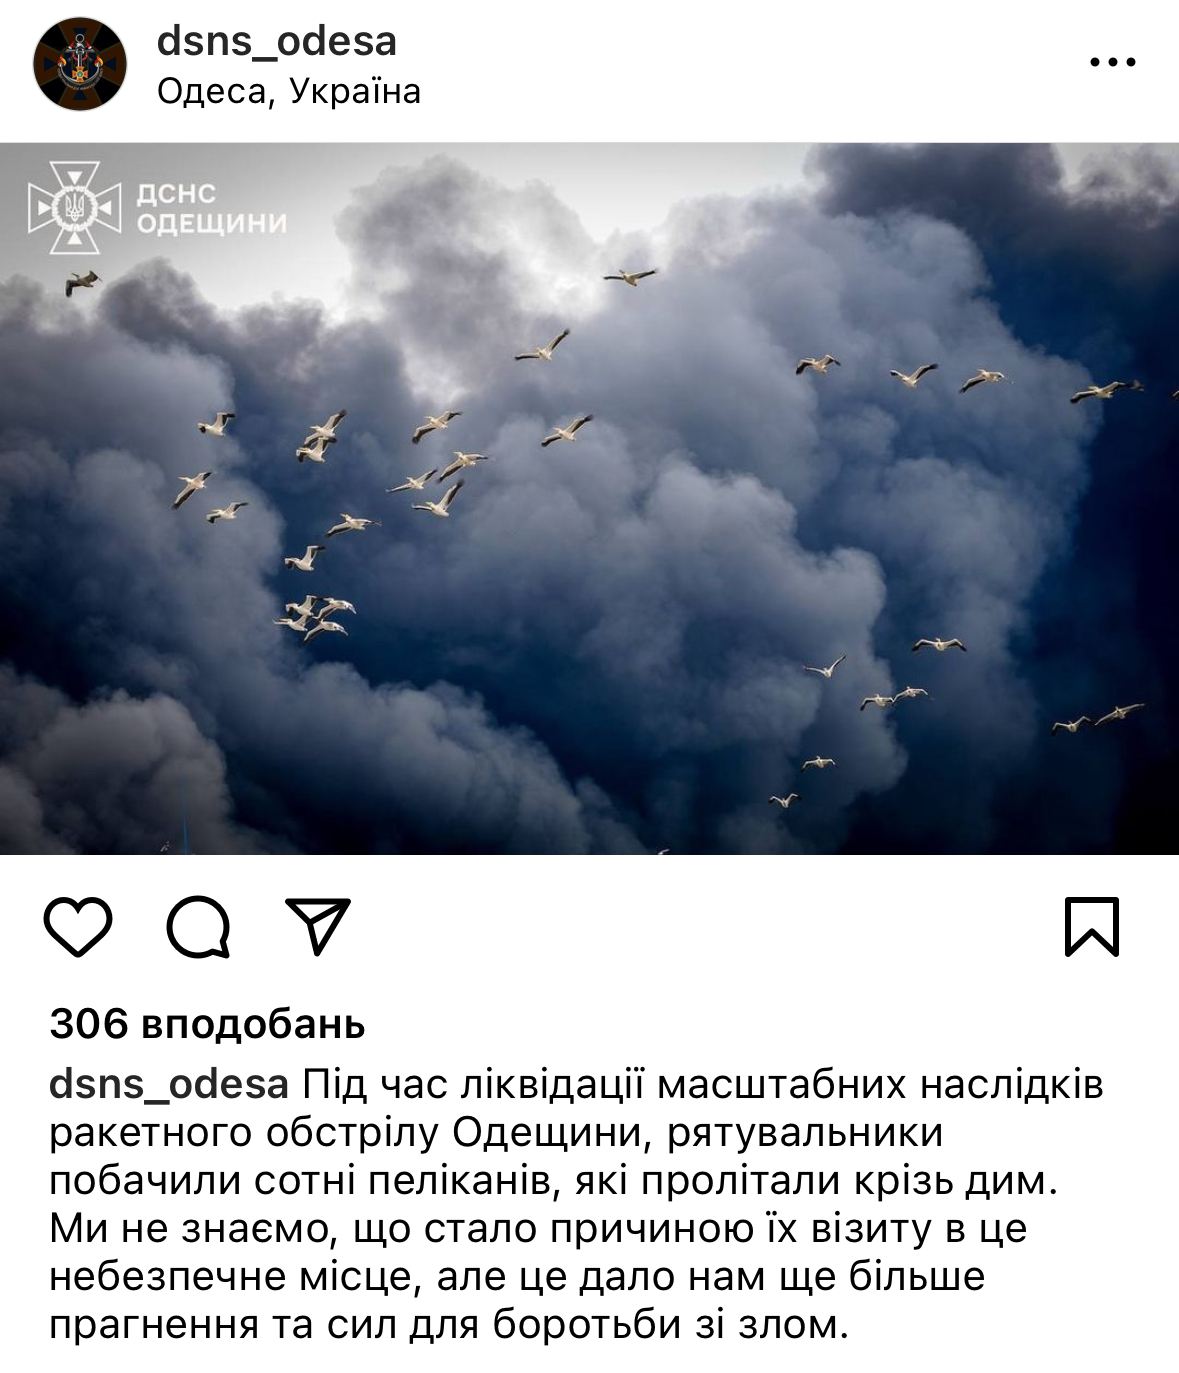 Nature also suffers from war. A photo of pelicans flying through the smoke from a rocket attack in Odesa region touched the web